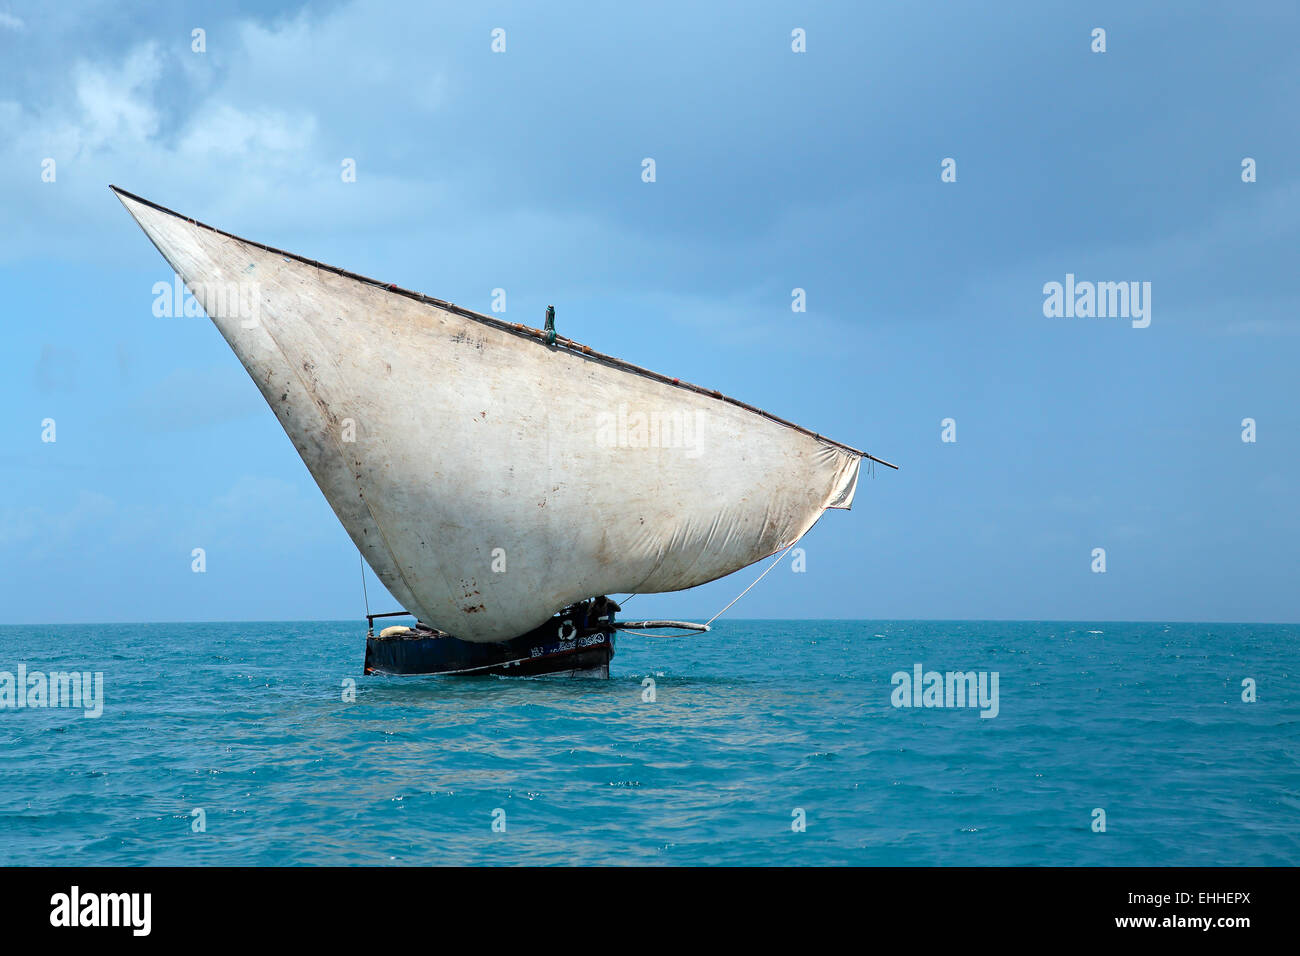 Wooden sailboat (dhow) on water with clouds, Zanzibar island Stock Photo